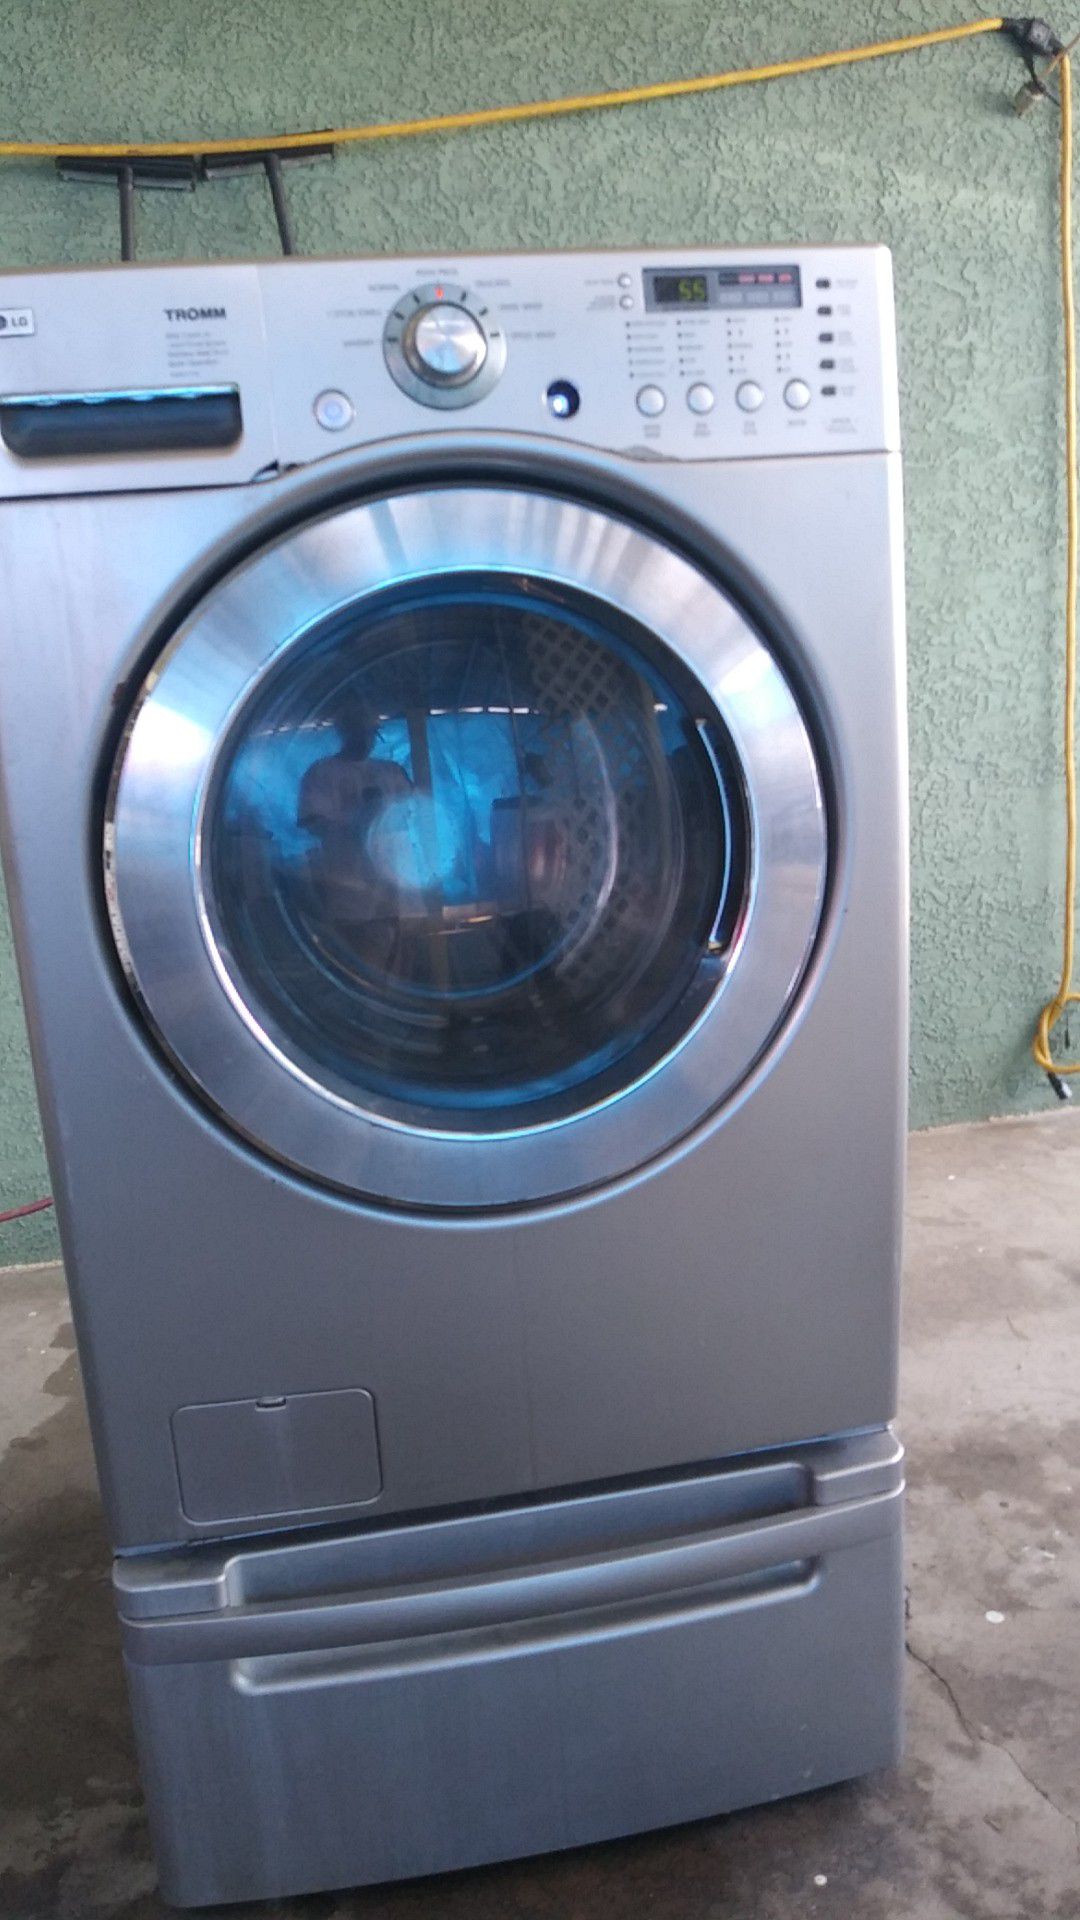 LG tromm Ultra capacity washer machine plugged in and ready for you to try